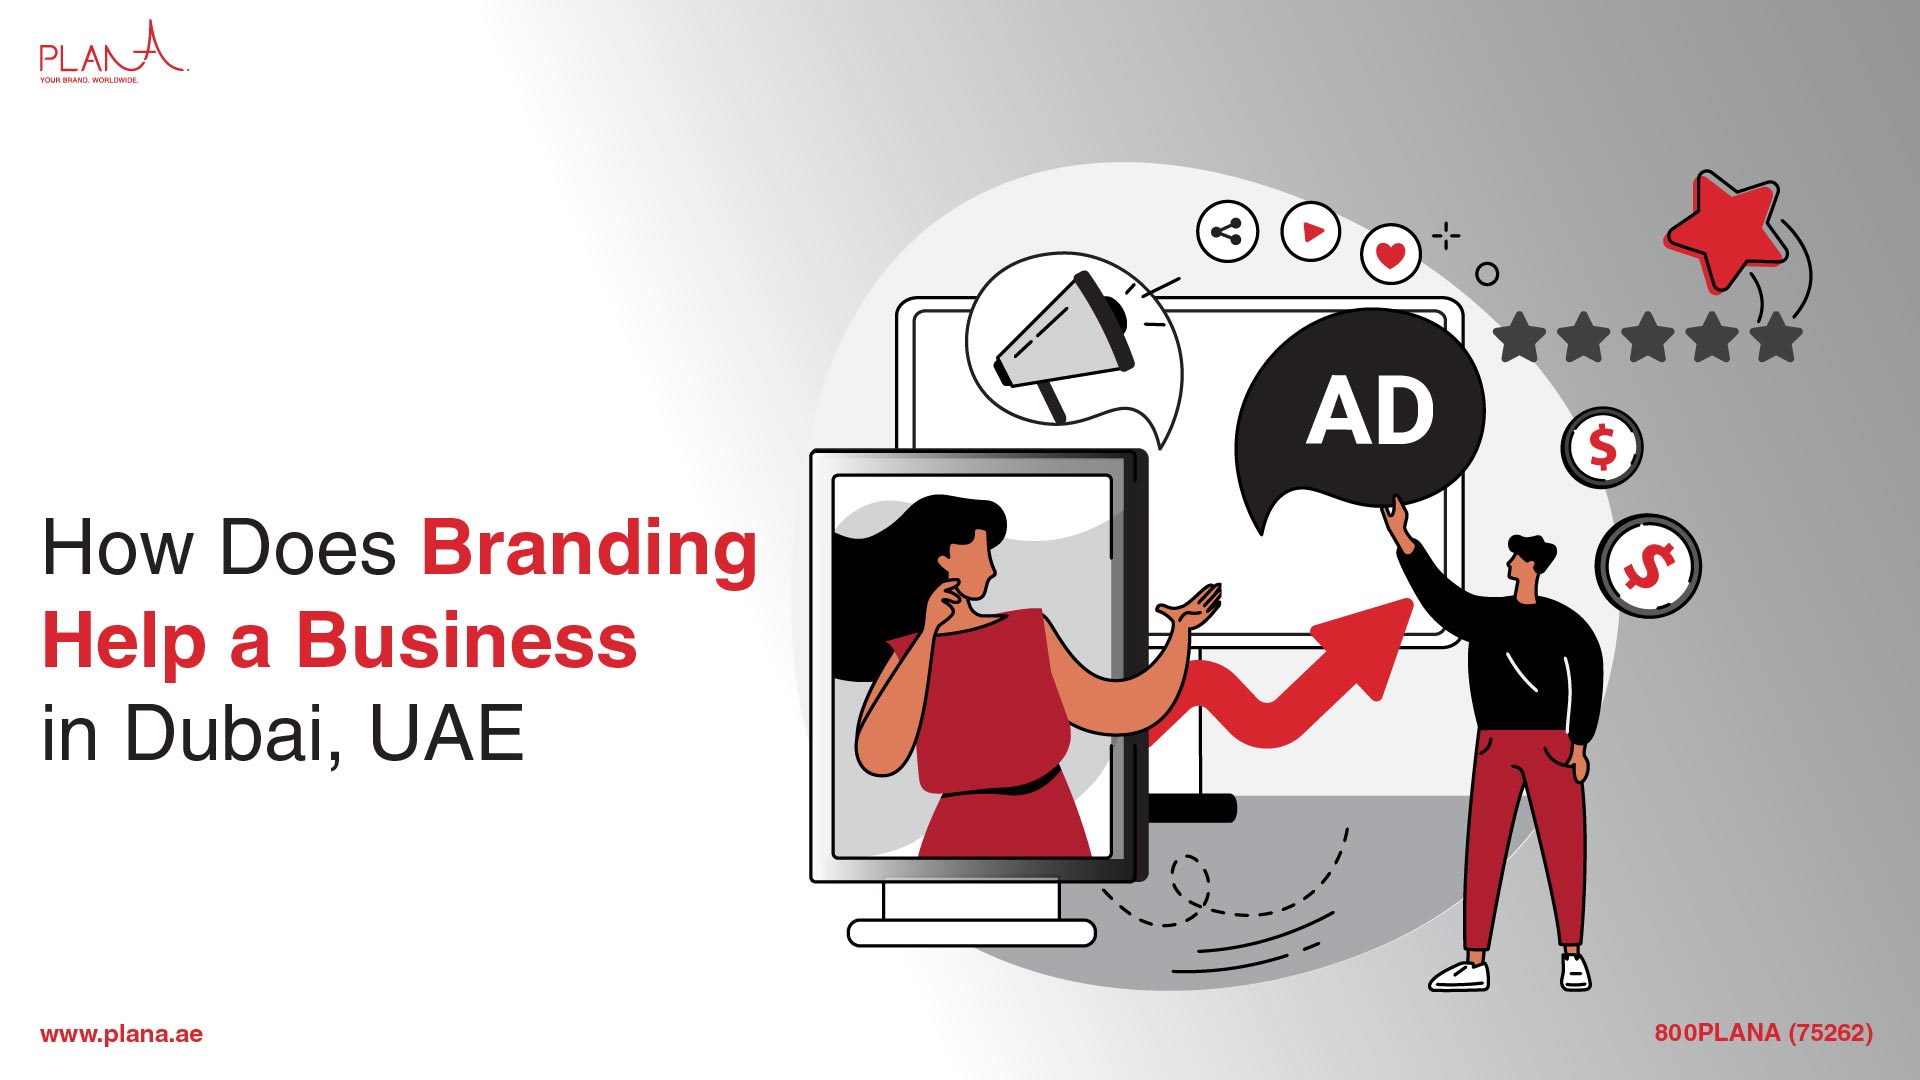 How Does Branding Help a Business in Dubai